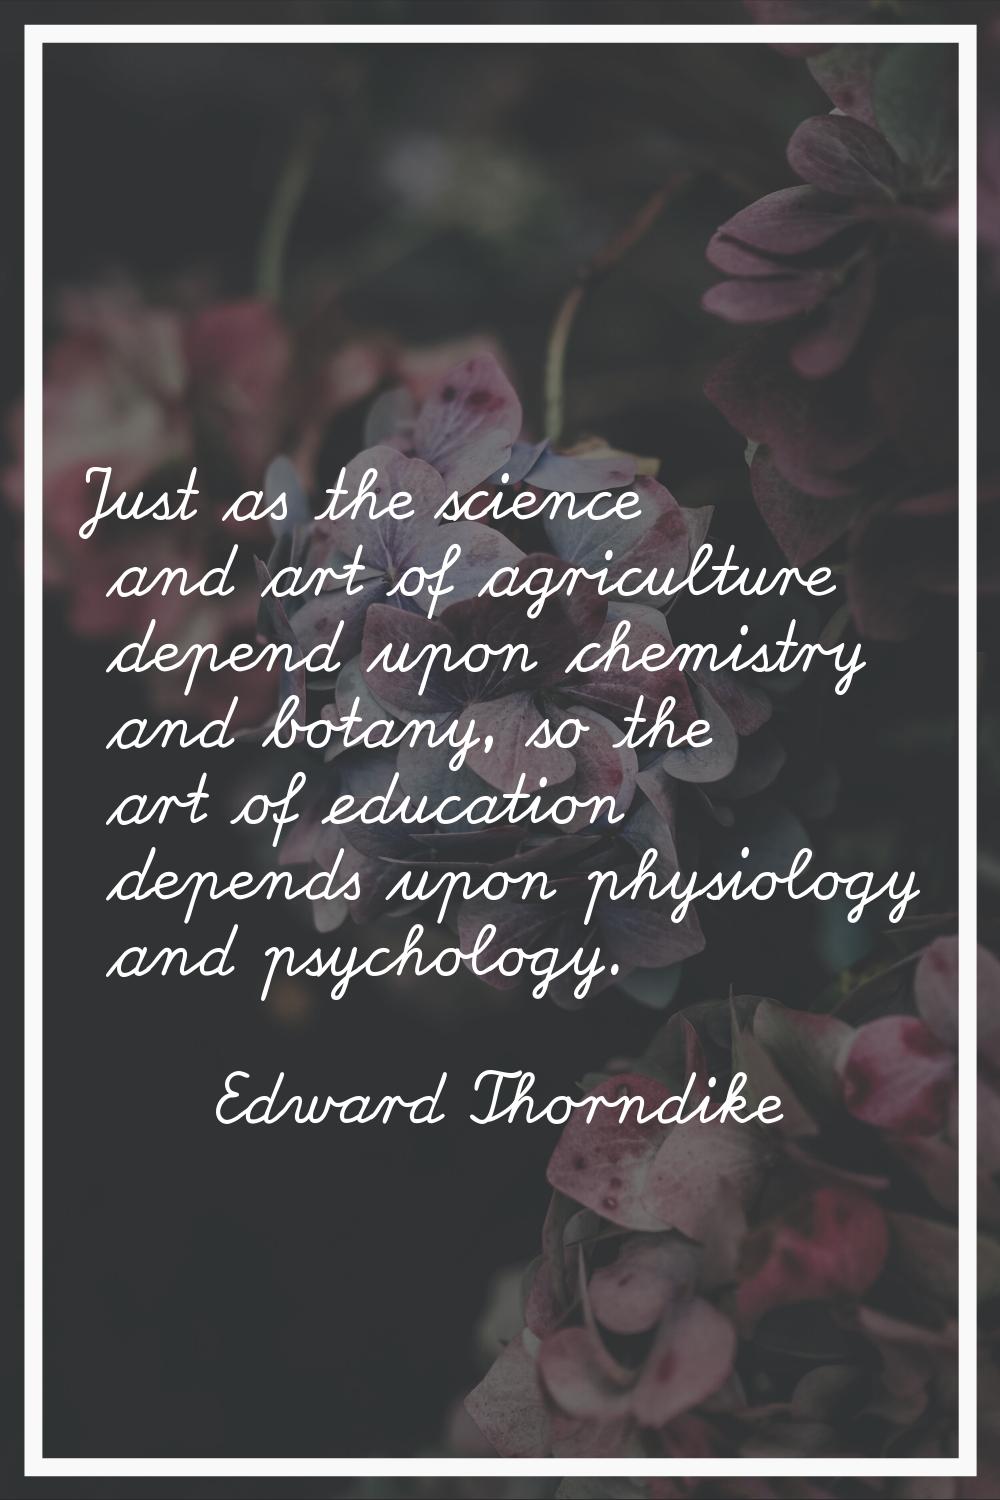 Just as the science and art of agriculture depend upon chemistry and botany, so the art of educatio